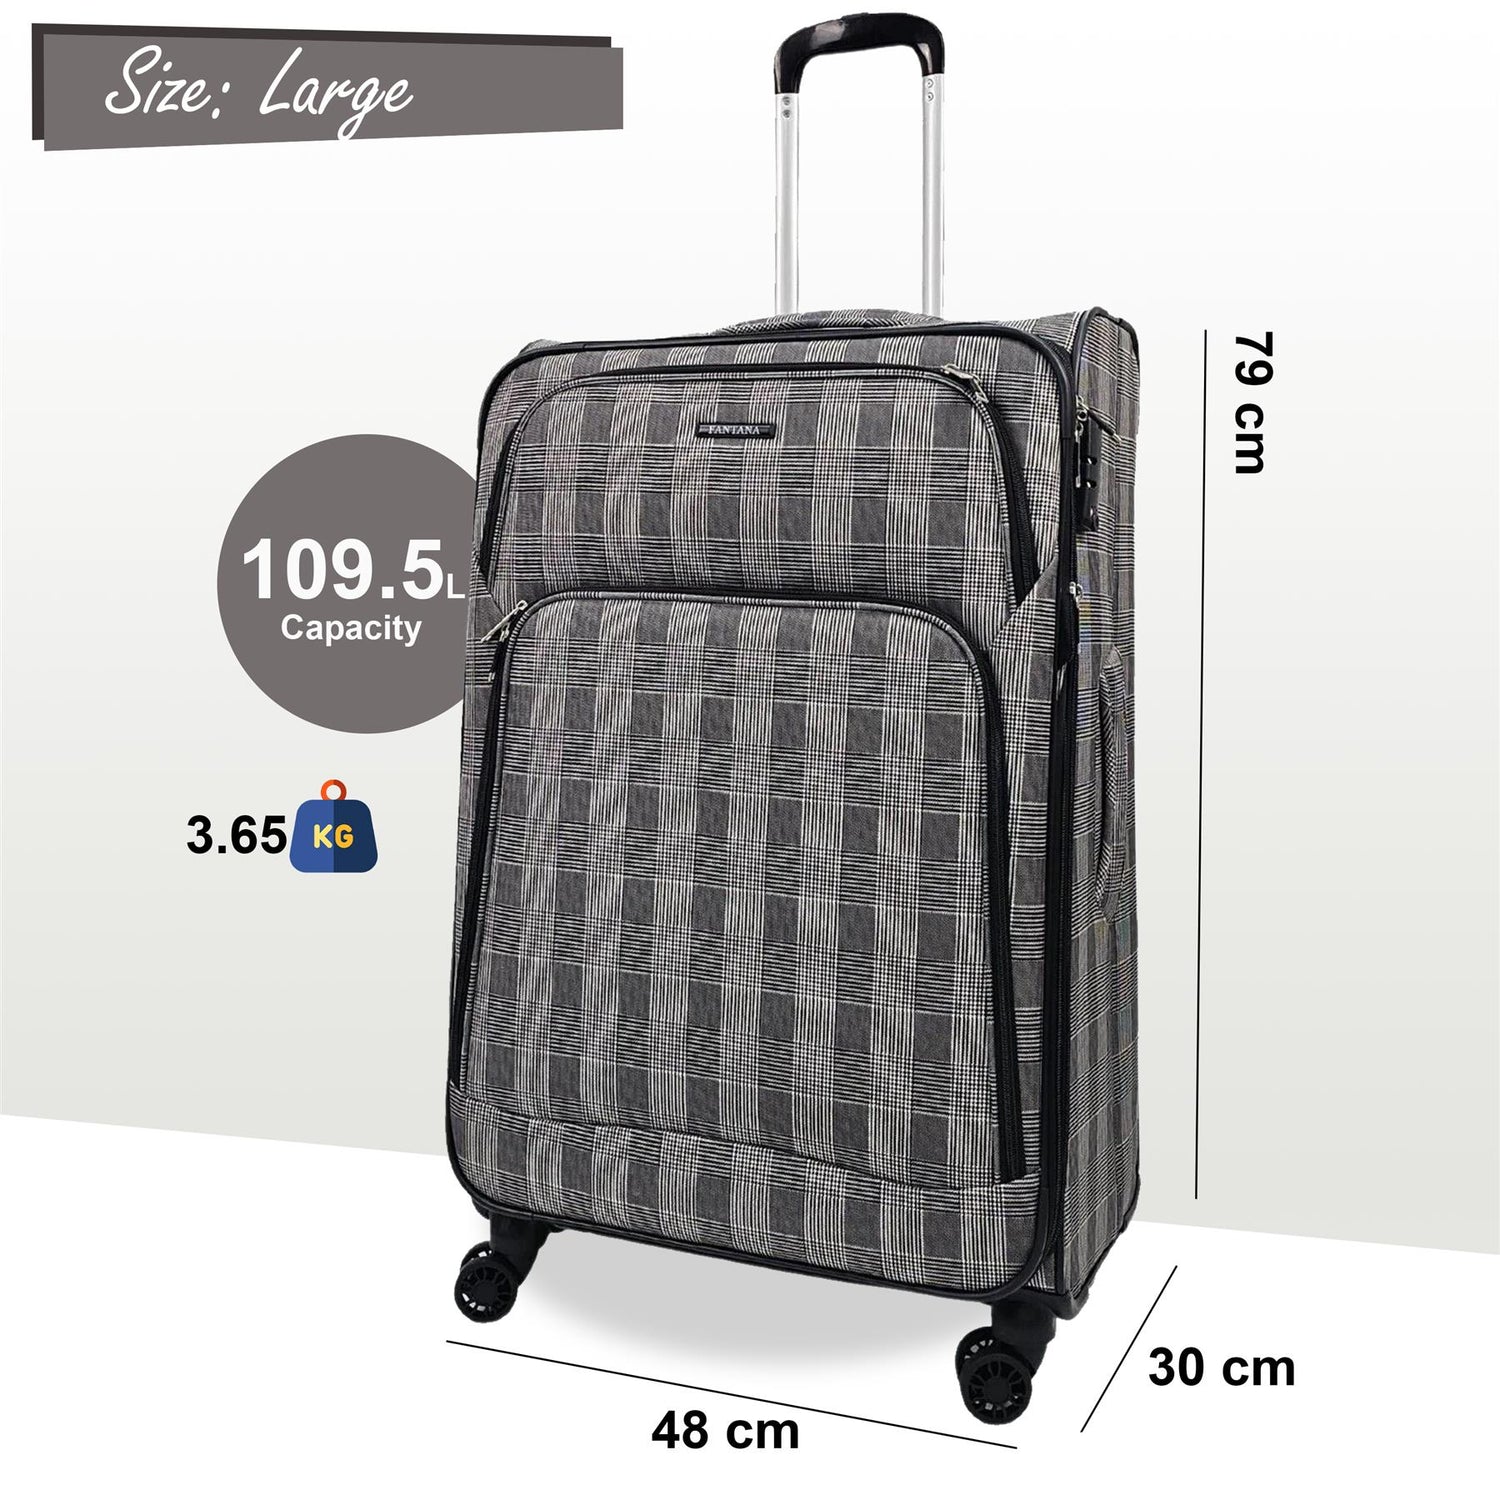 Ashville Large Soft Shell Suitcase in Stripe